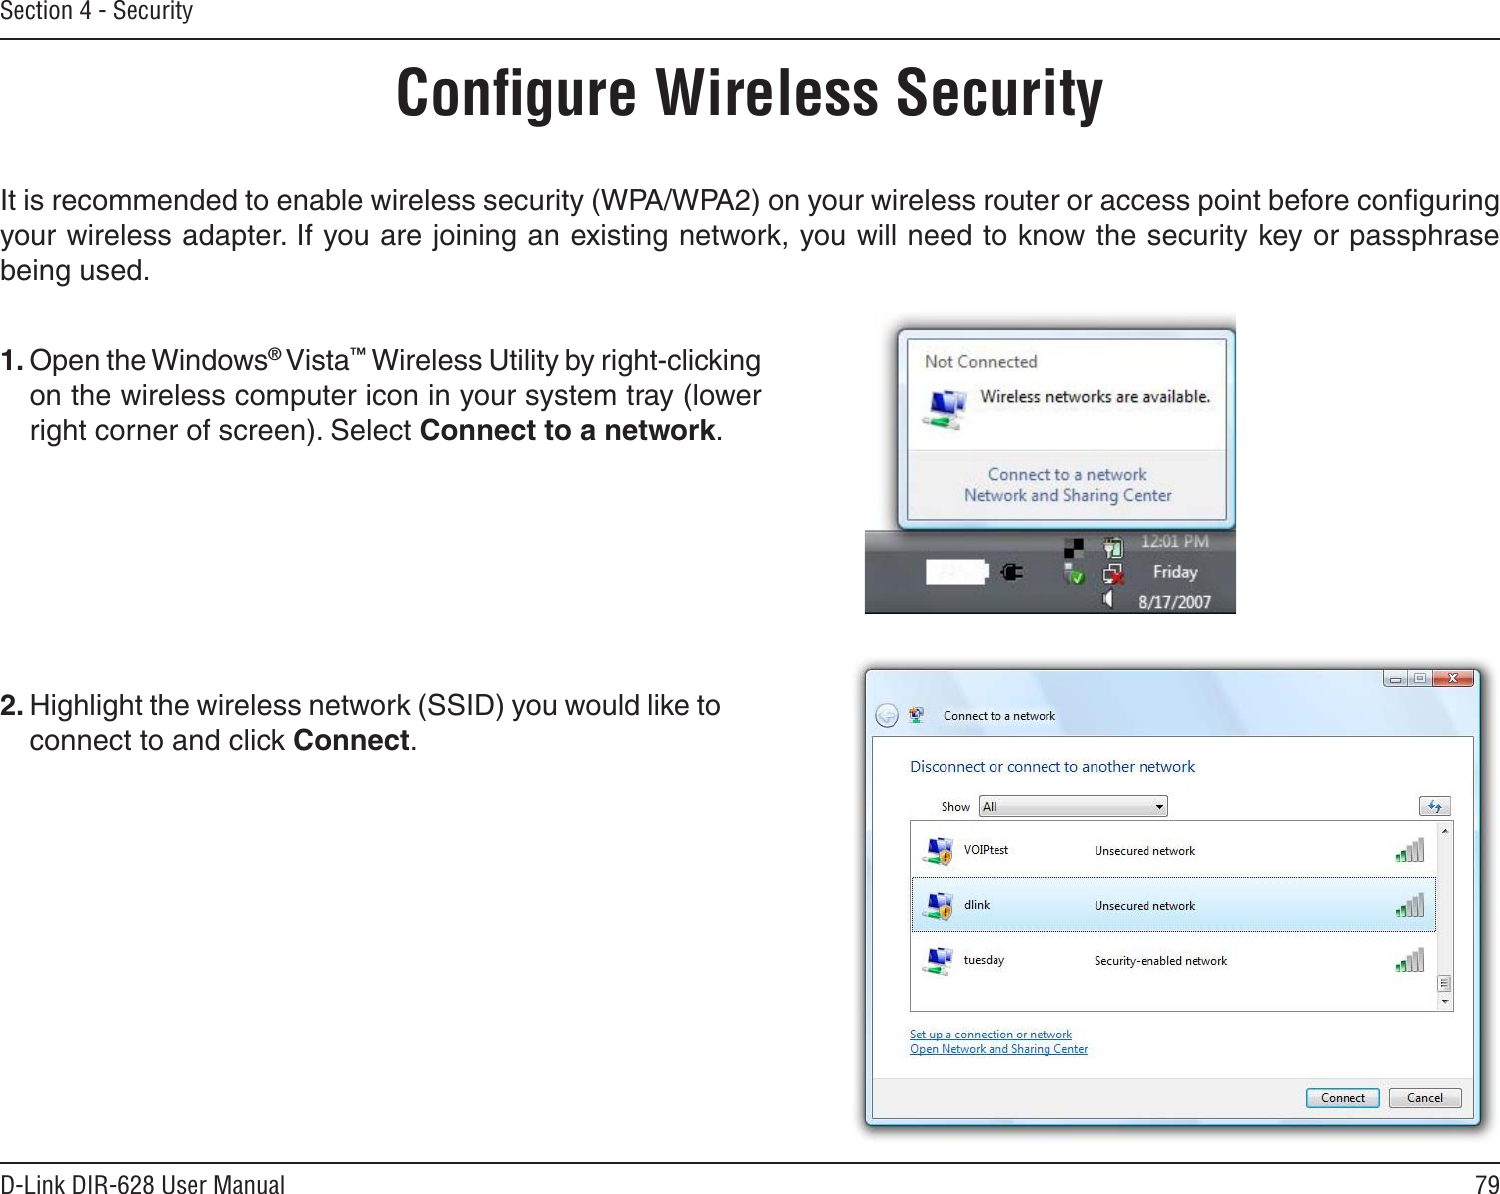 79D-Link DIR-628 User ManualSection 4 - SecurityConﬁgure Wireless SecurityIt is recommended to enable wireless security (WPA/WPA2) on your wireless router or access point before conﬁguring your wireless adapter. If you are joining an existing network, you will need to know the security key or passphrase being used.2. Highlight the wireless network (SSID) you would like to connect to and click Connect.1. Open the Windows® Vista™ Wireless Utility by right-clicking on the wireless computer icon in your system tray (lower right corner of screen). Select Connect to a network. 